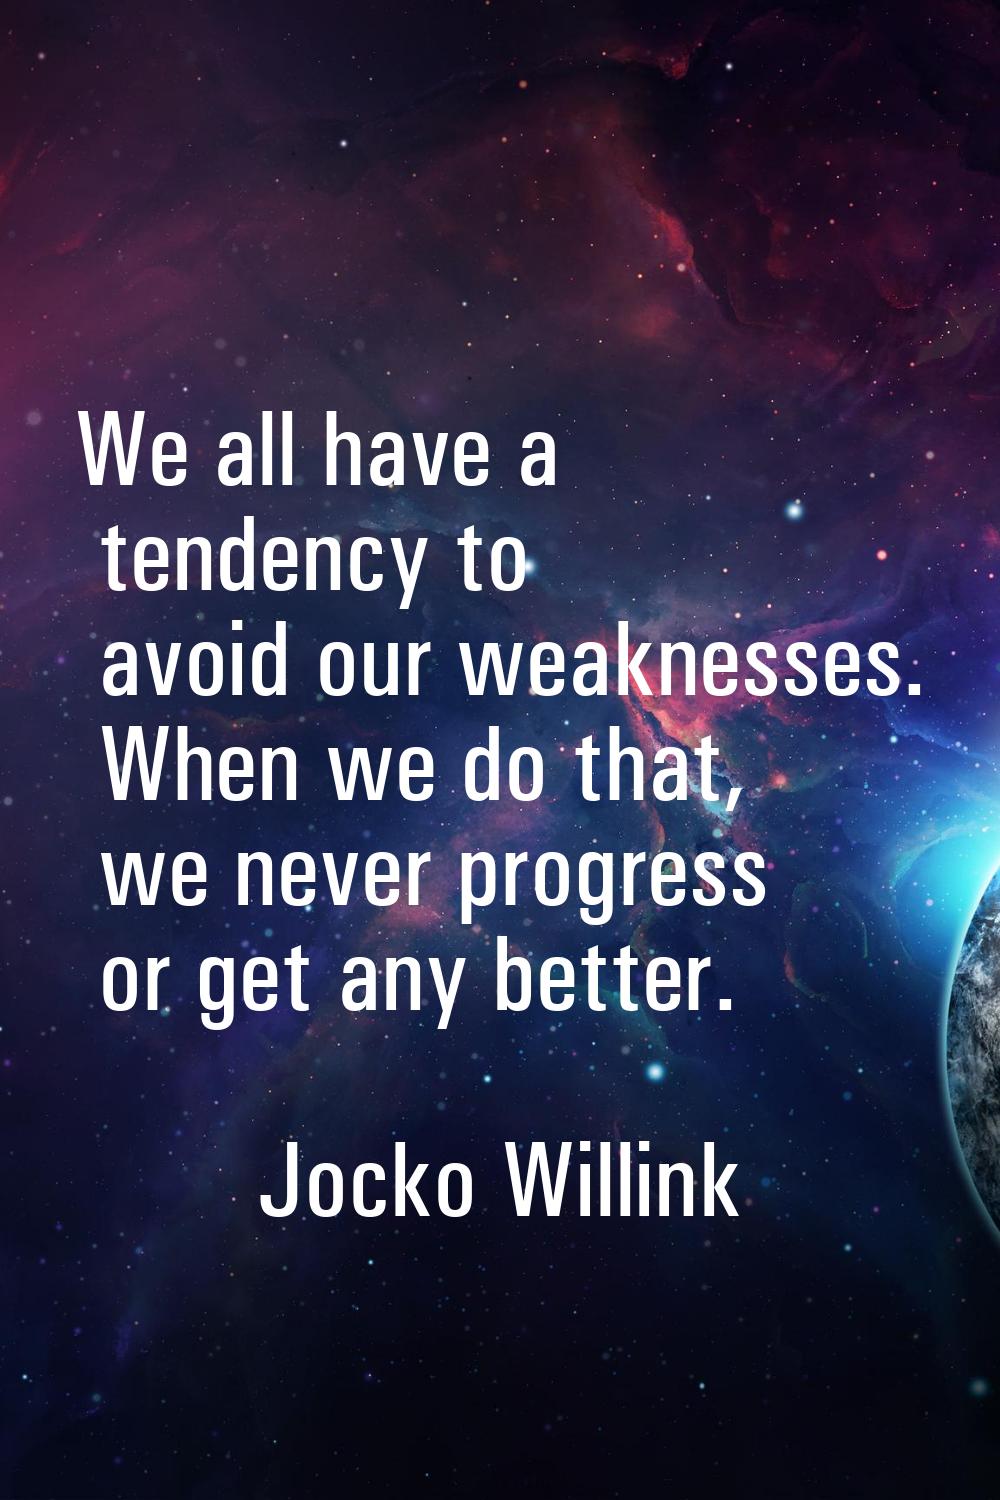 We all have a tendency to avoid our weaknesses. When we do that, we never progress or get any bette